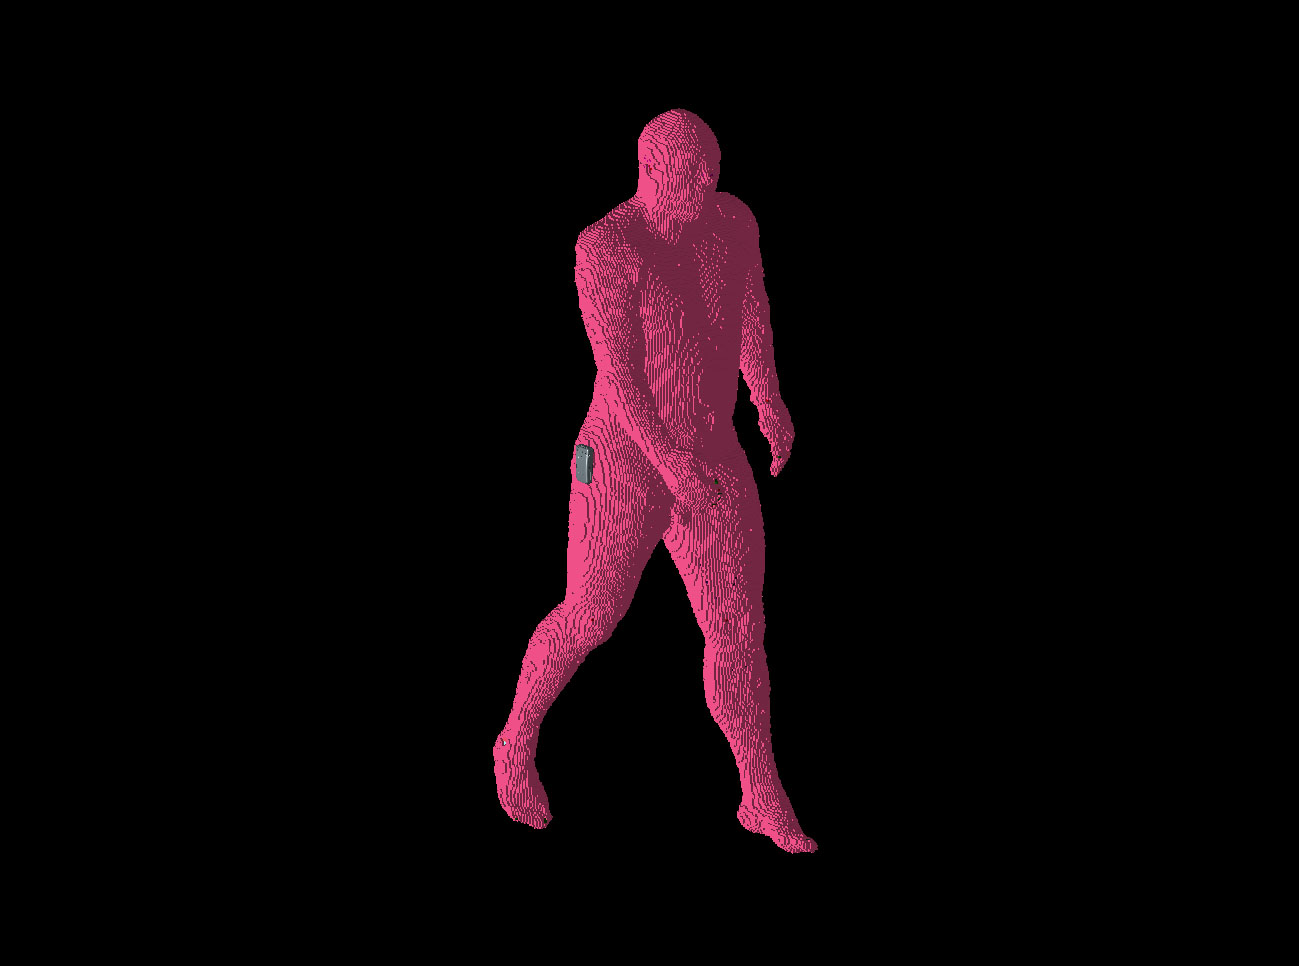 Figure 2: Position 1 of the walking man is shown with the left foot forward and the right arm forward of the phone location.